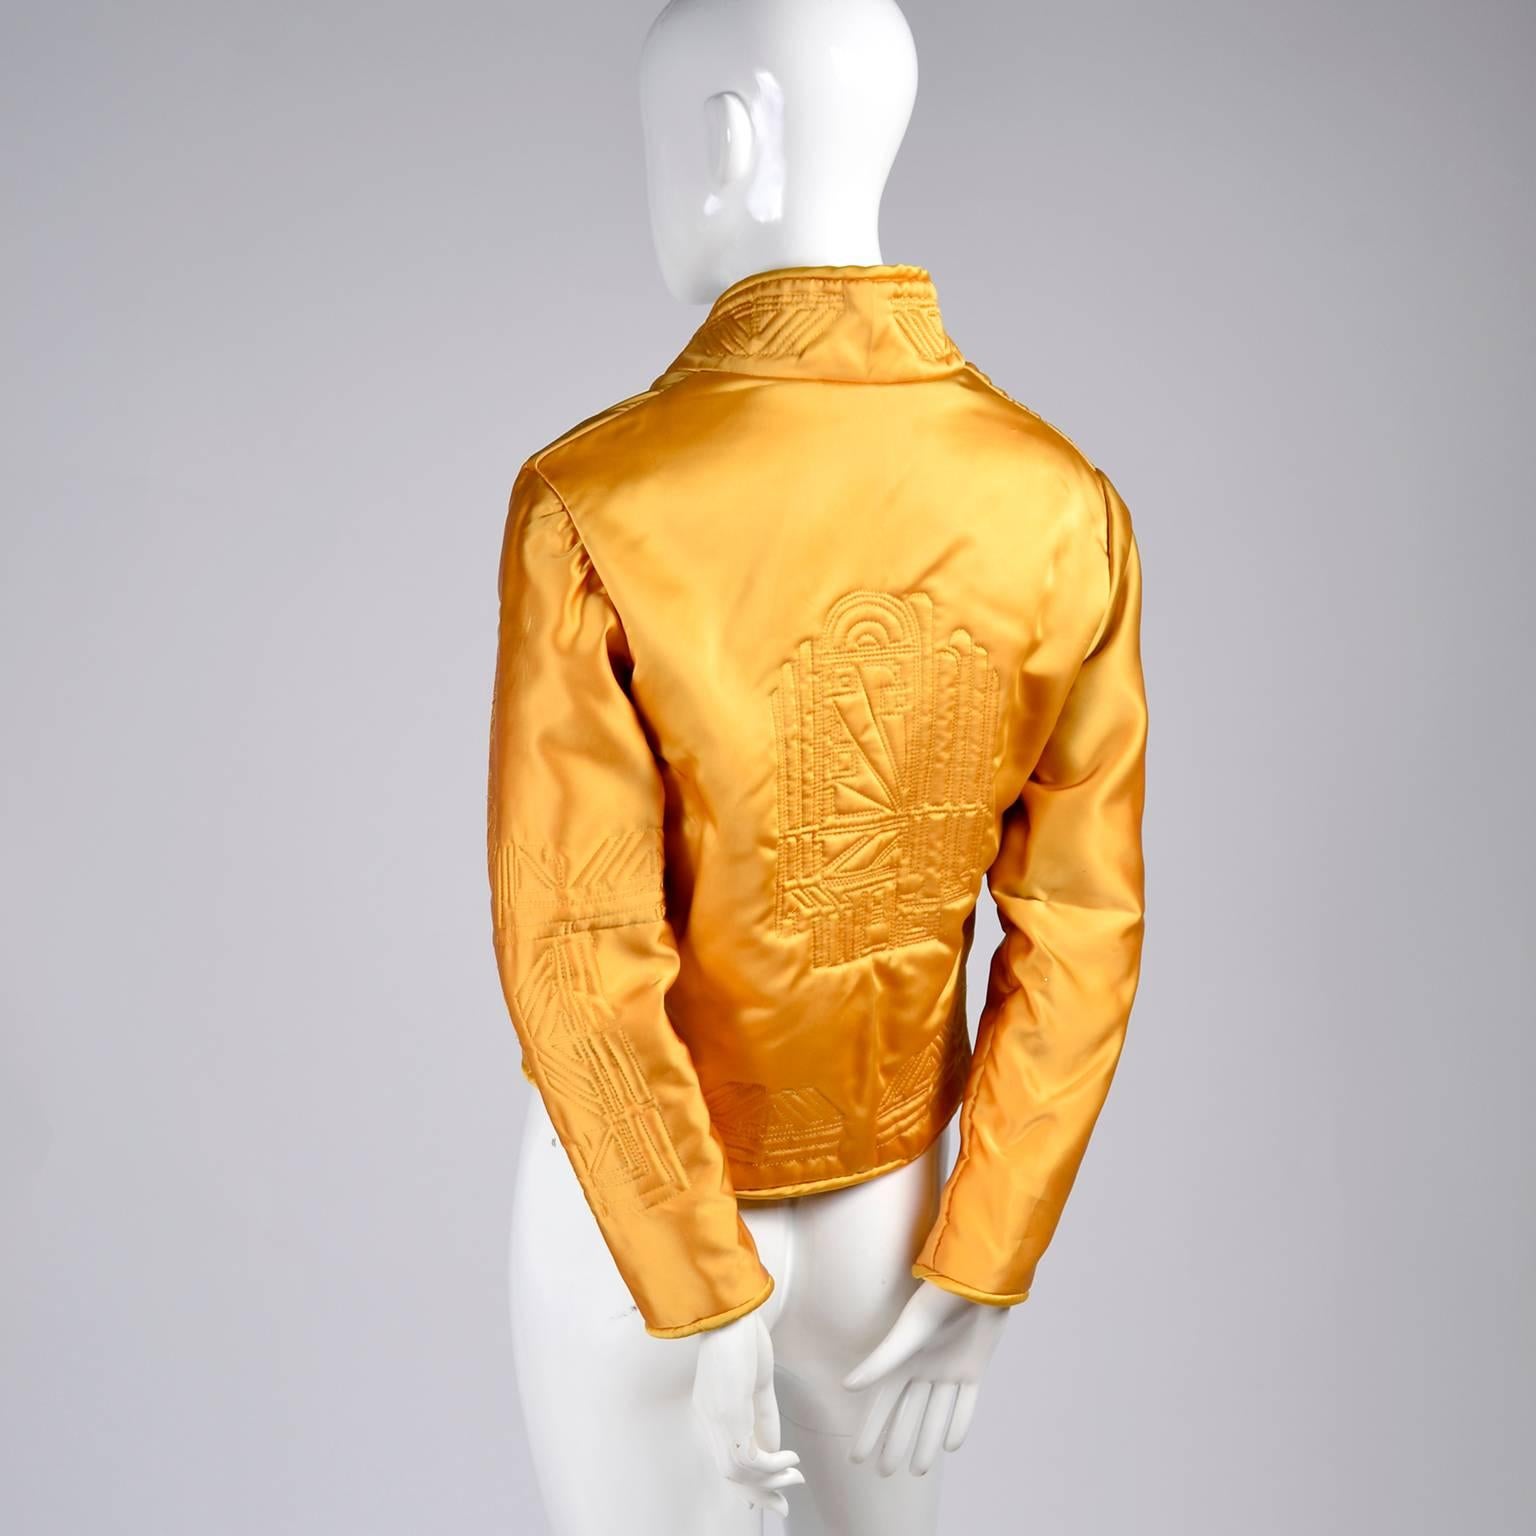 Women's 1980s Vintage Jacket in Art Deco Inspired Quilted Gold Silk Fabric